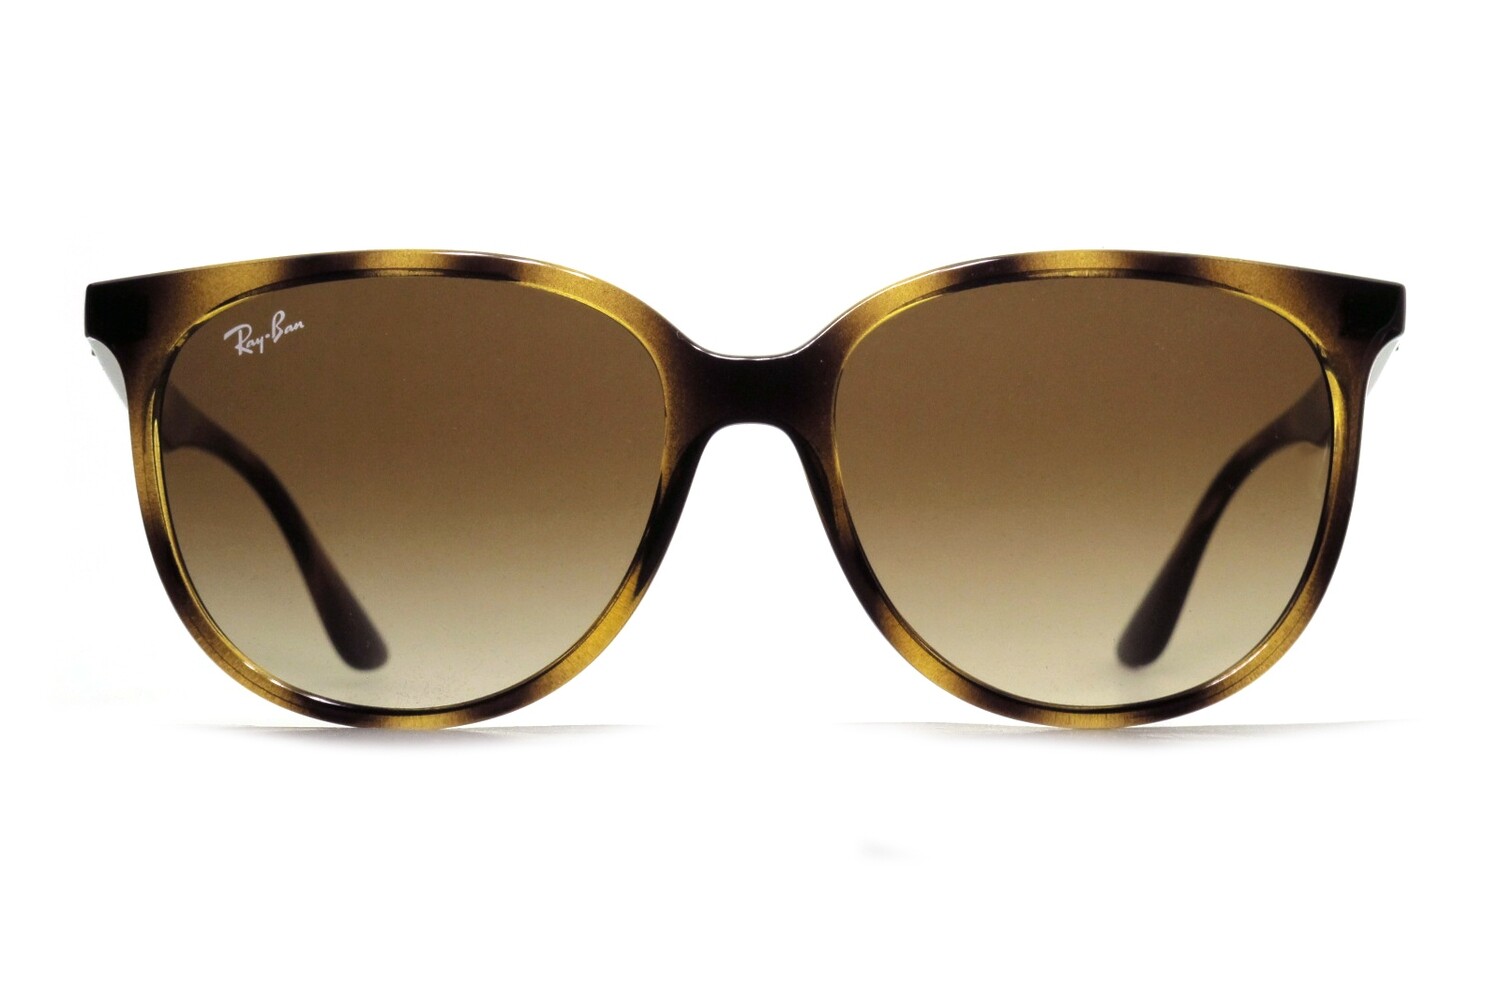 4378 by Ray Ban